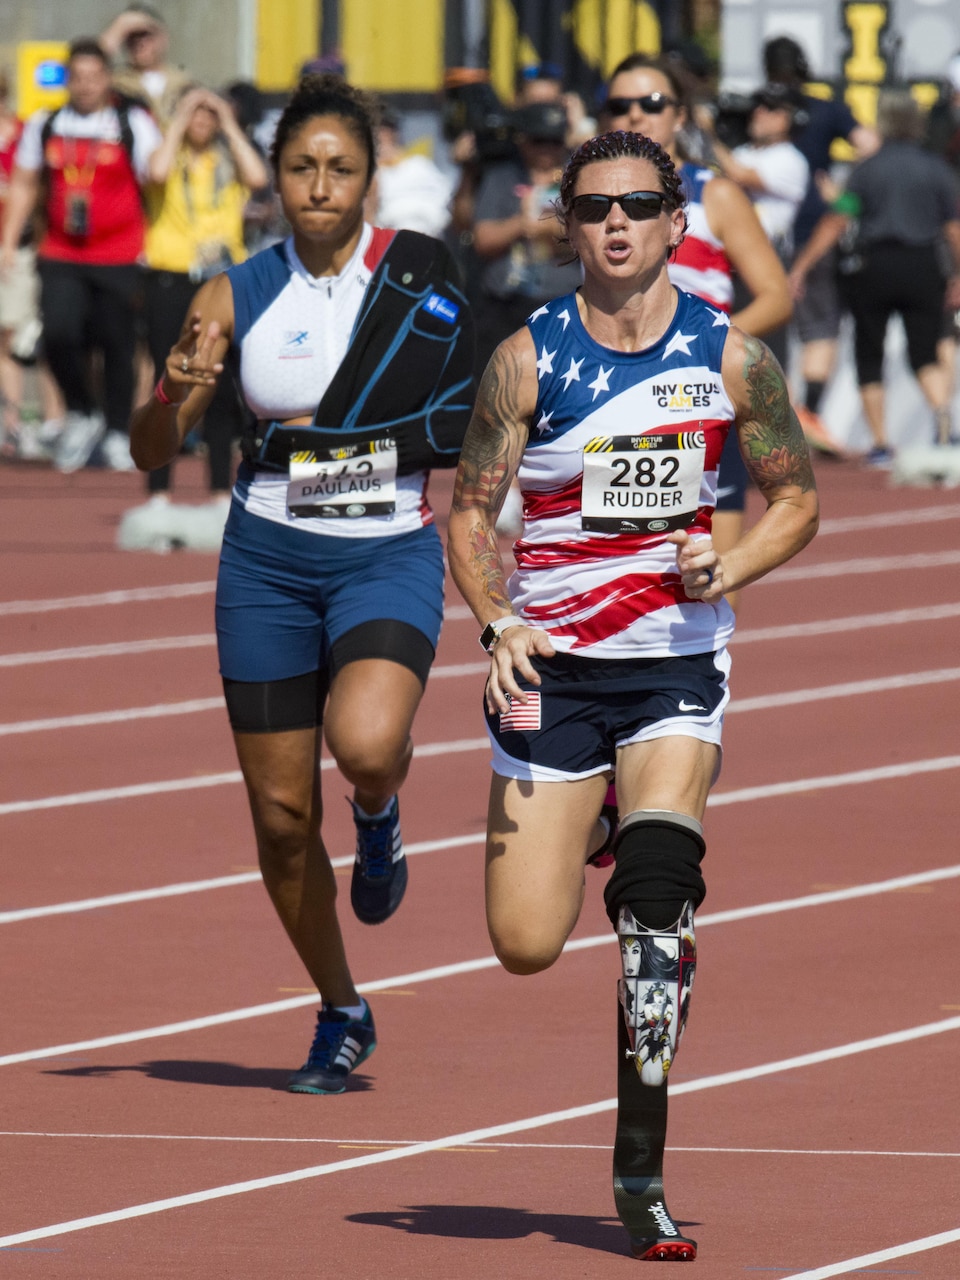 Retired Marine Corps Cpl. Sarah Rudder, right, competes in the women's 100-meter dash.